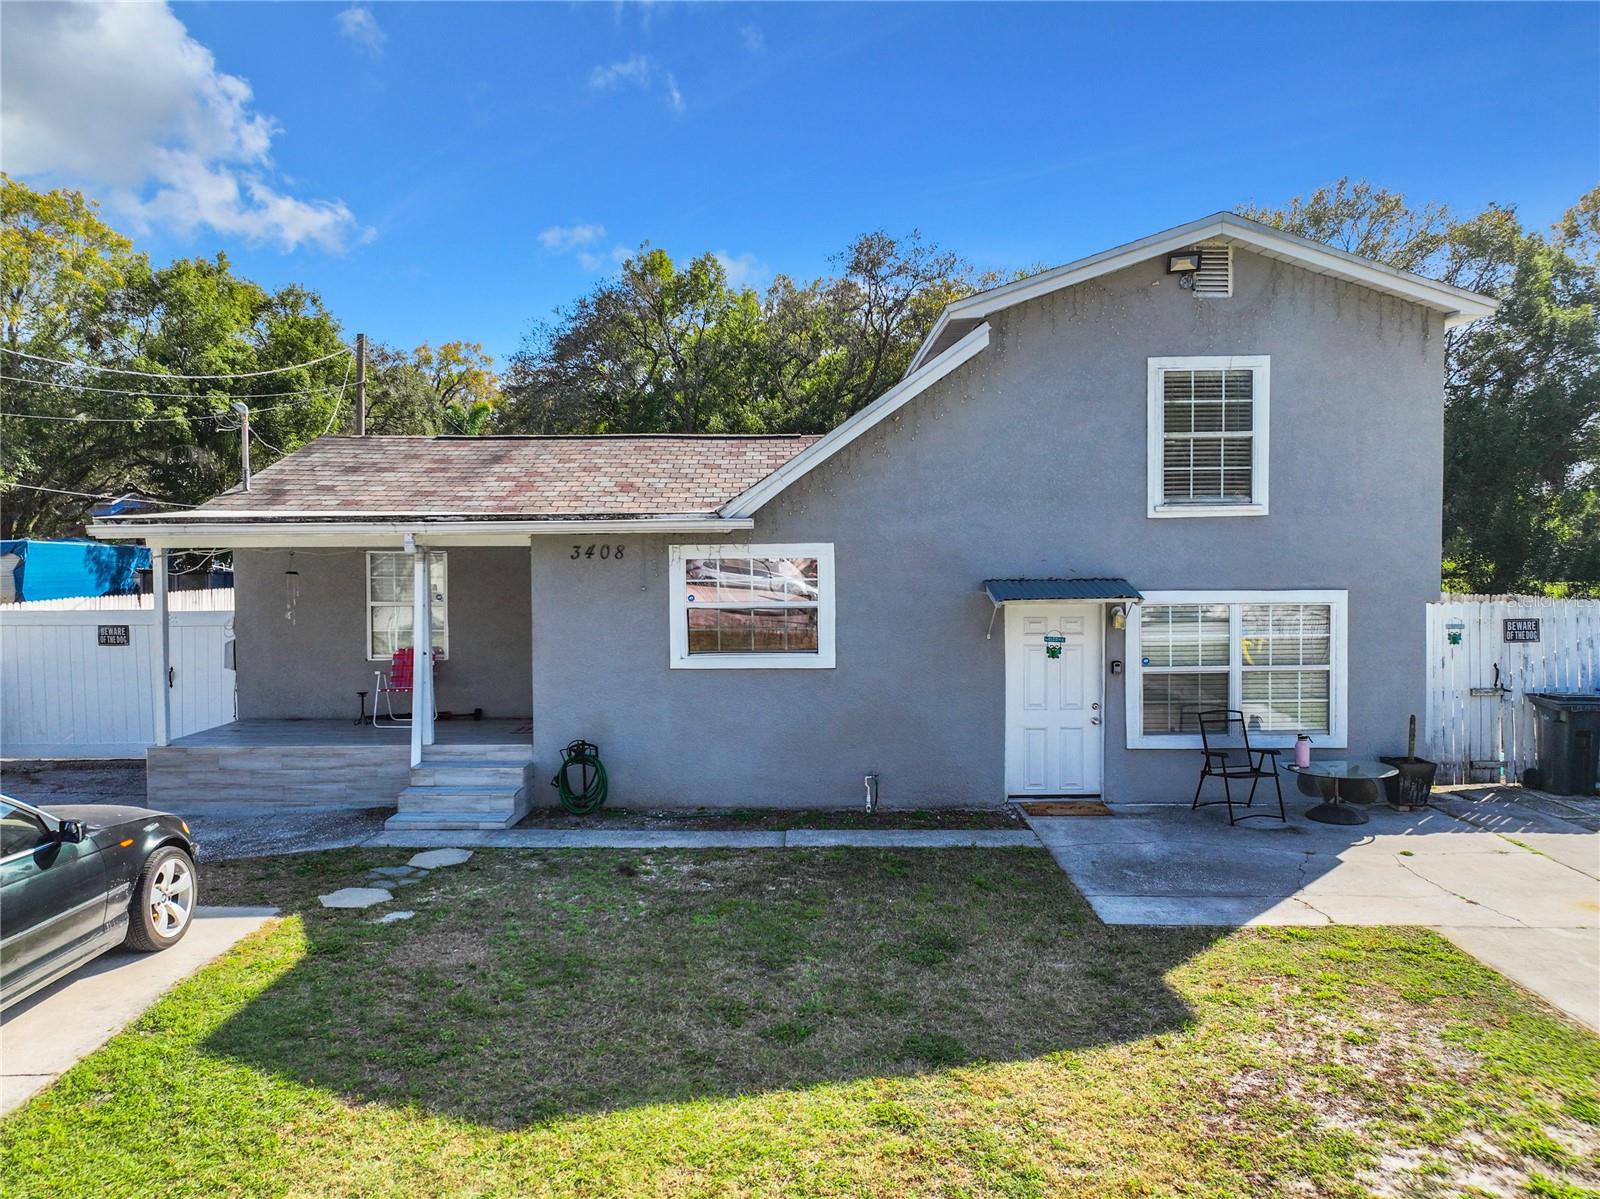 Details for 3408 River Cove Drive, TAMPA, FL 33614